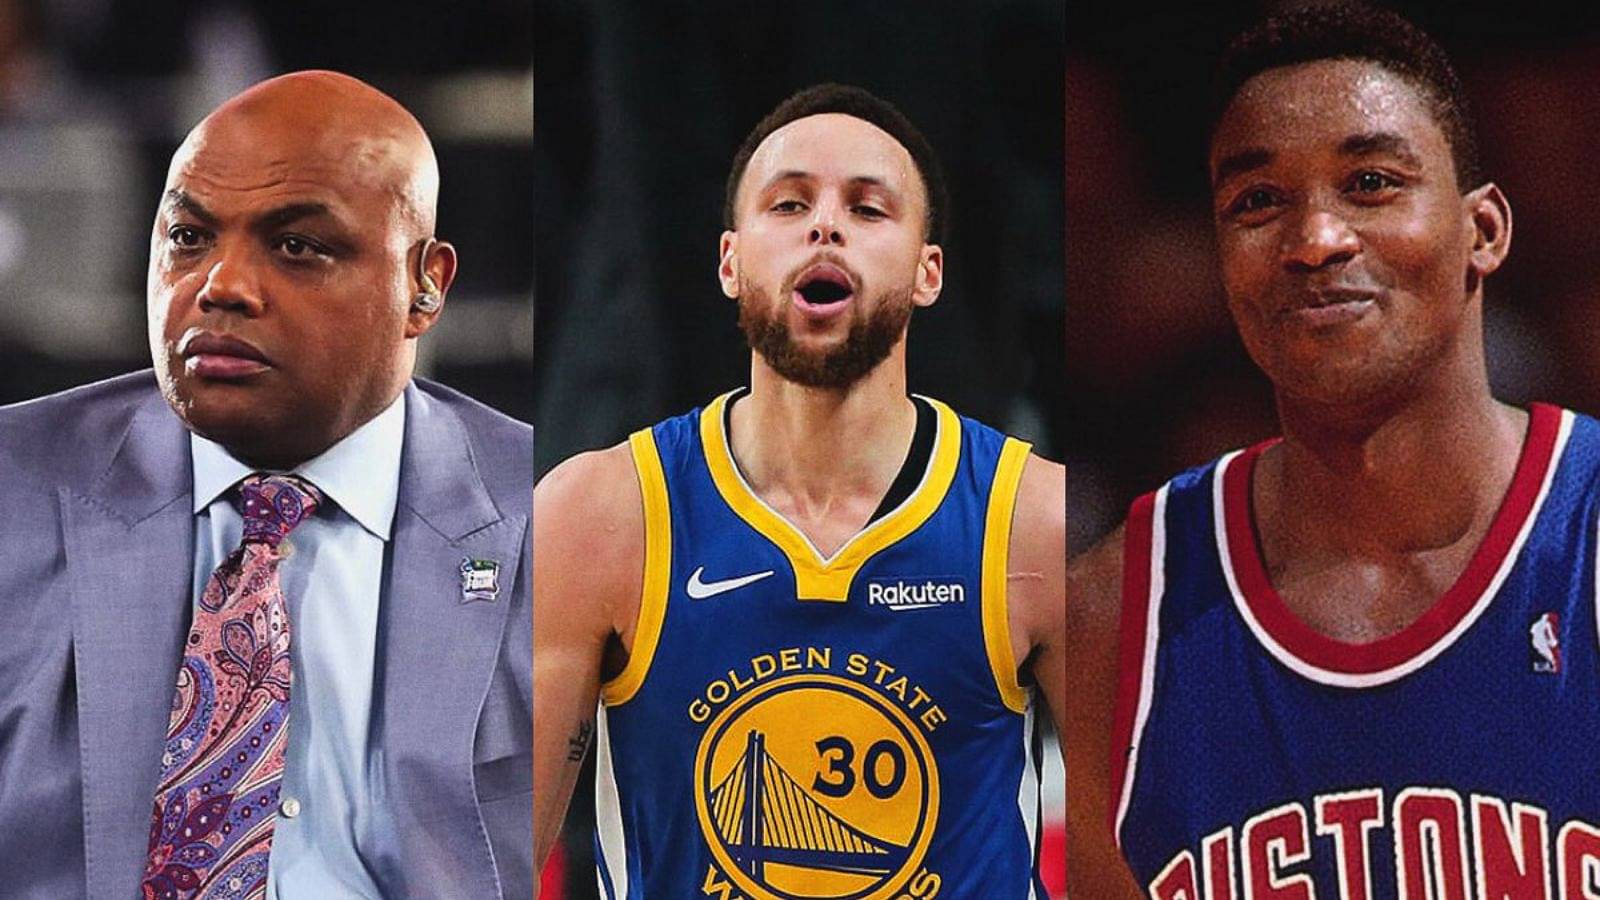 Cover Image for “Stephen Curry is one of the greatest ever, somewhere between 10 and 20”: Charles Barkley walks back on his take about 2x MVP being better than Isiah Thomas